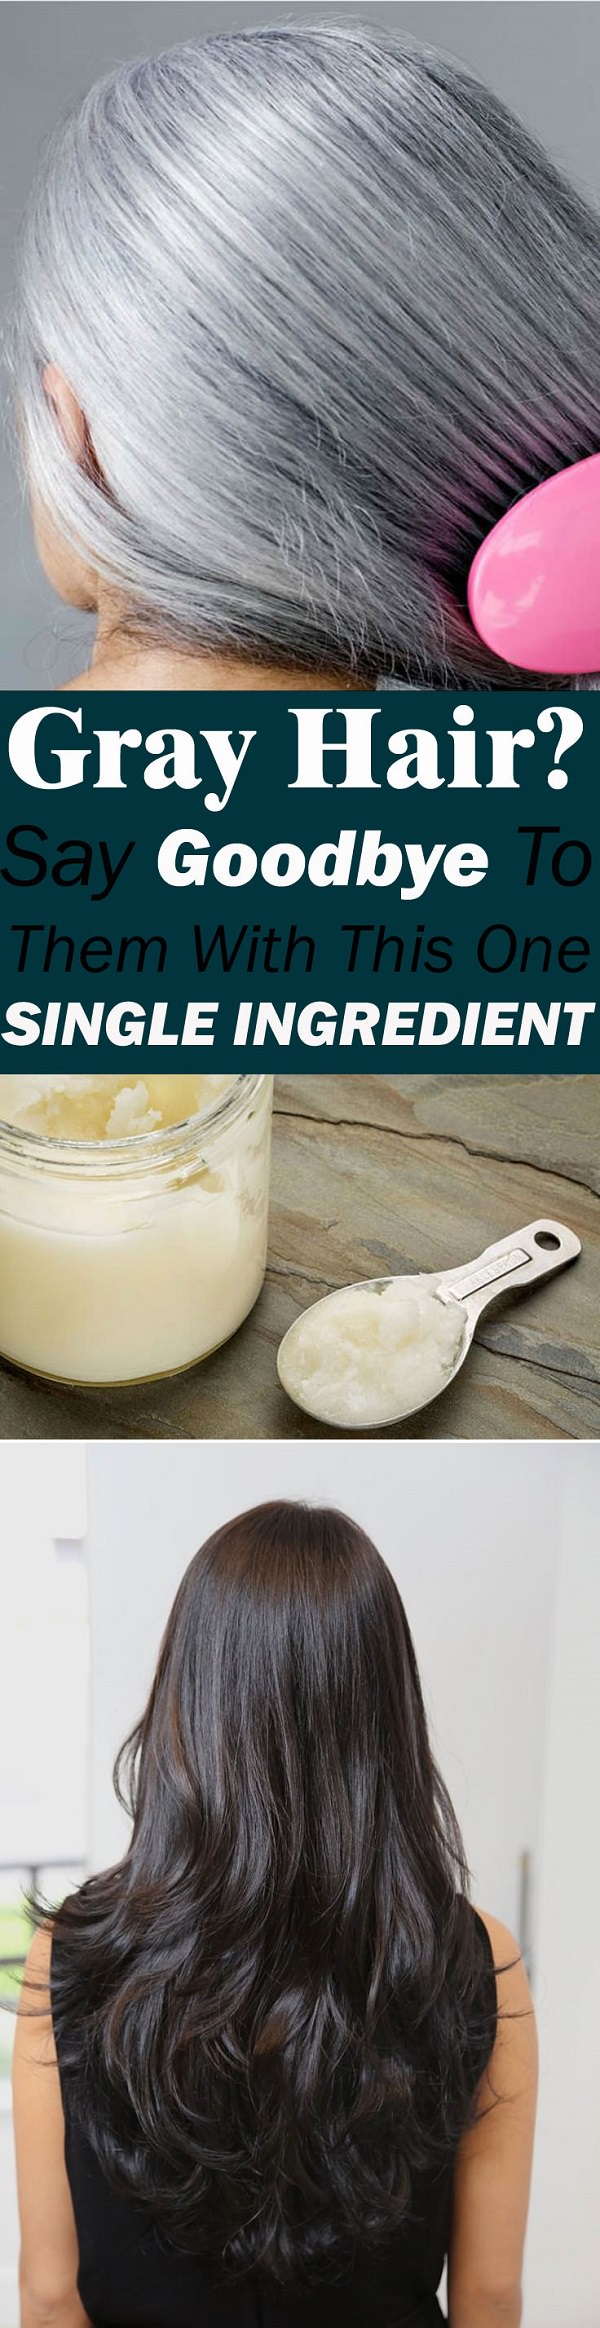 Gray-Hair-Say-Goodbye-to-Them-With-This-One-Single-Ingredient1-2